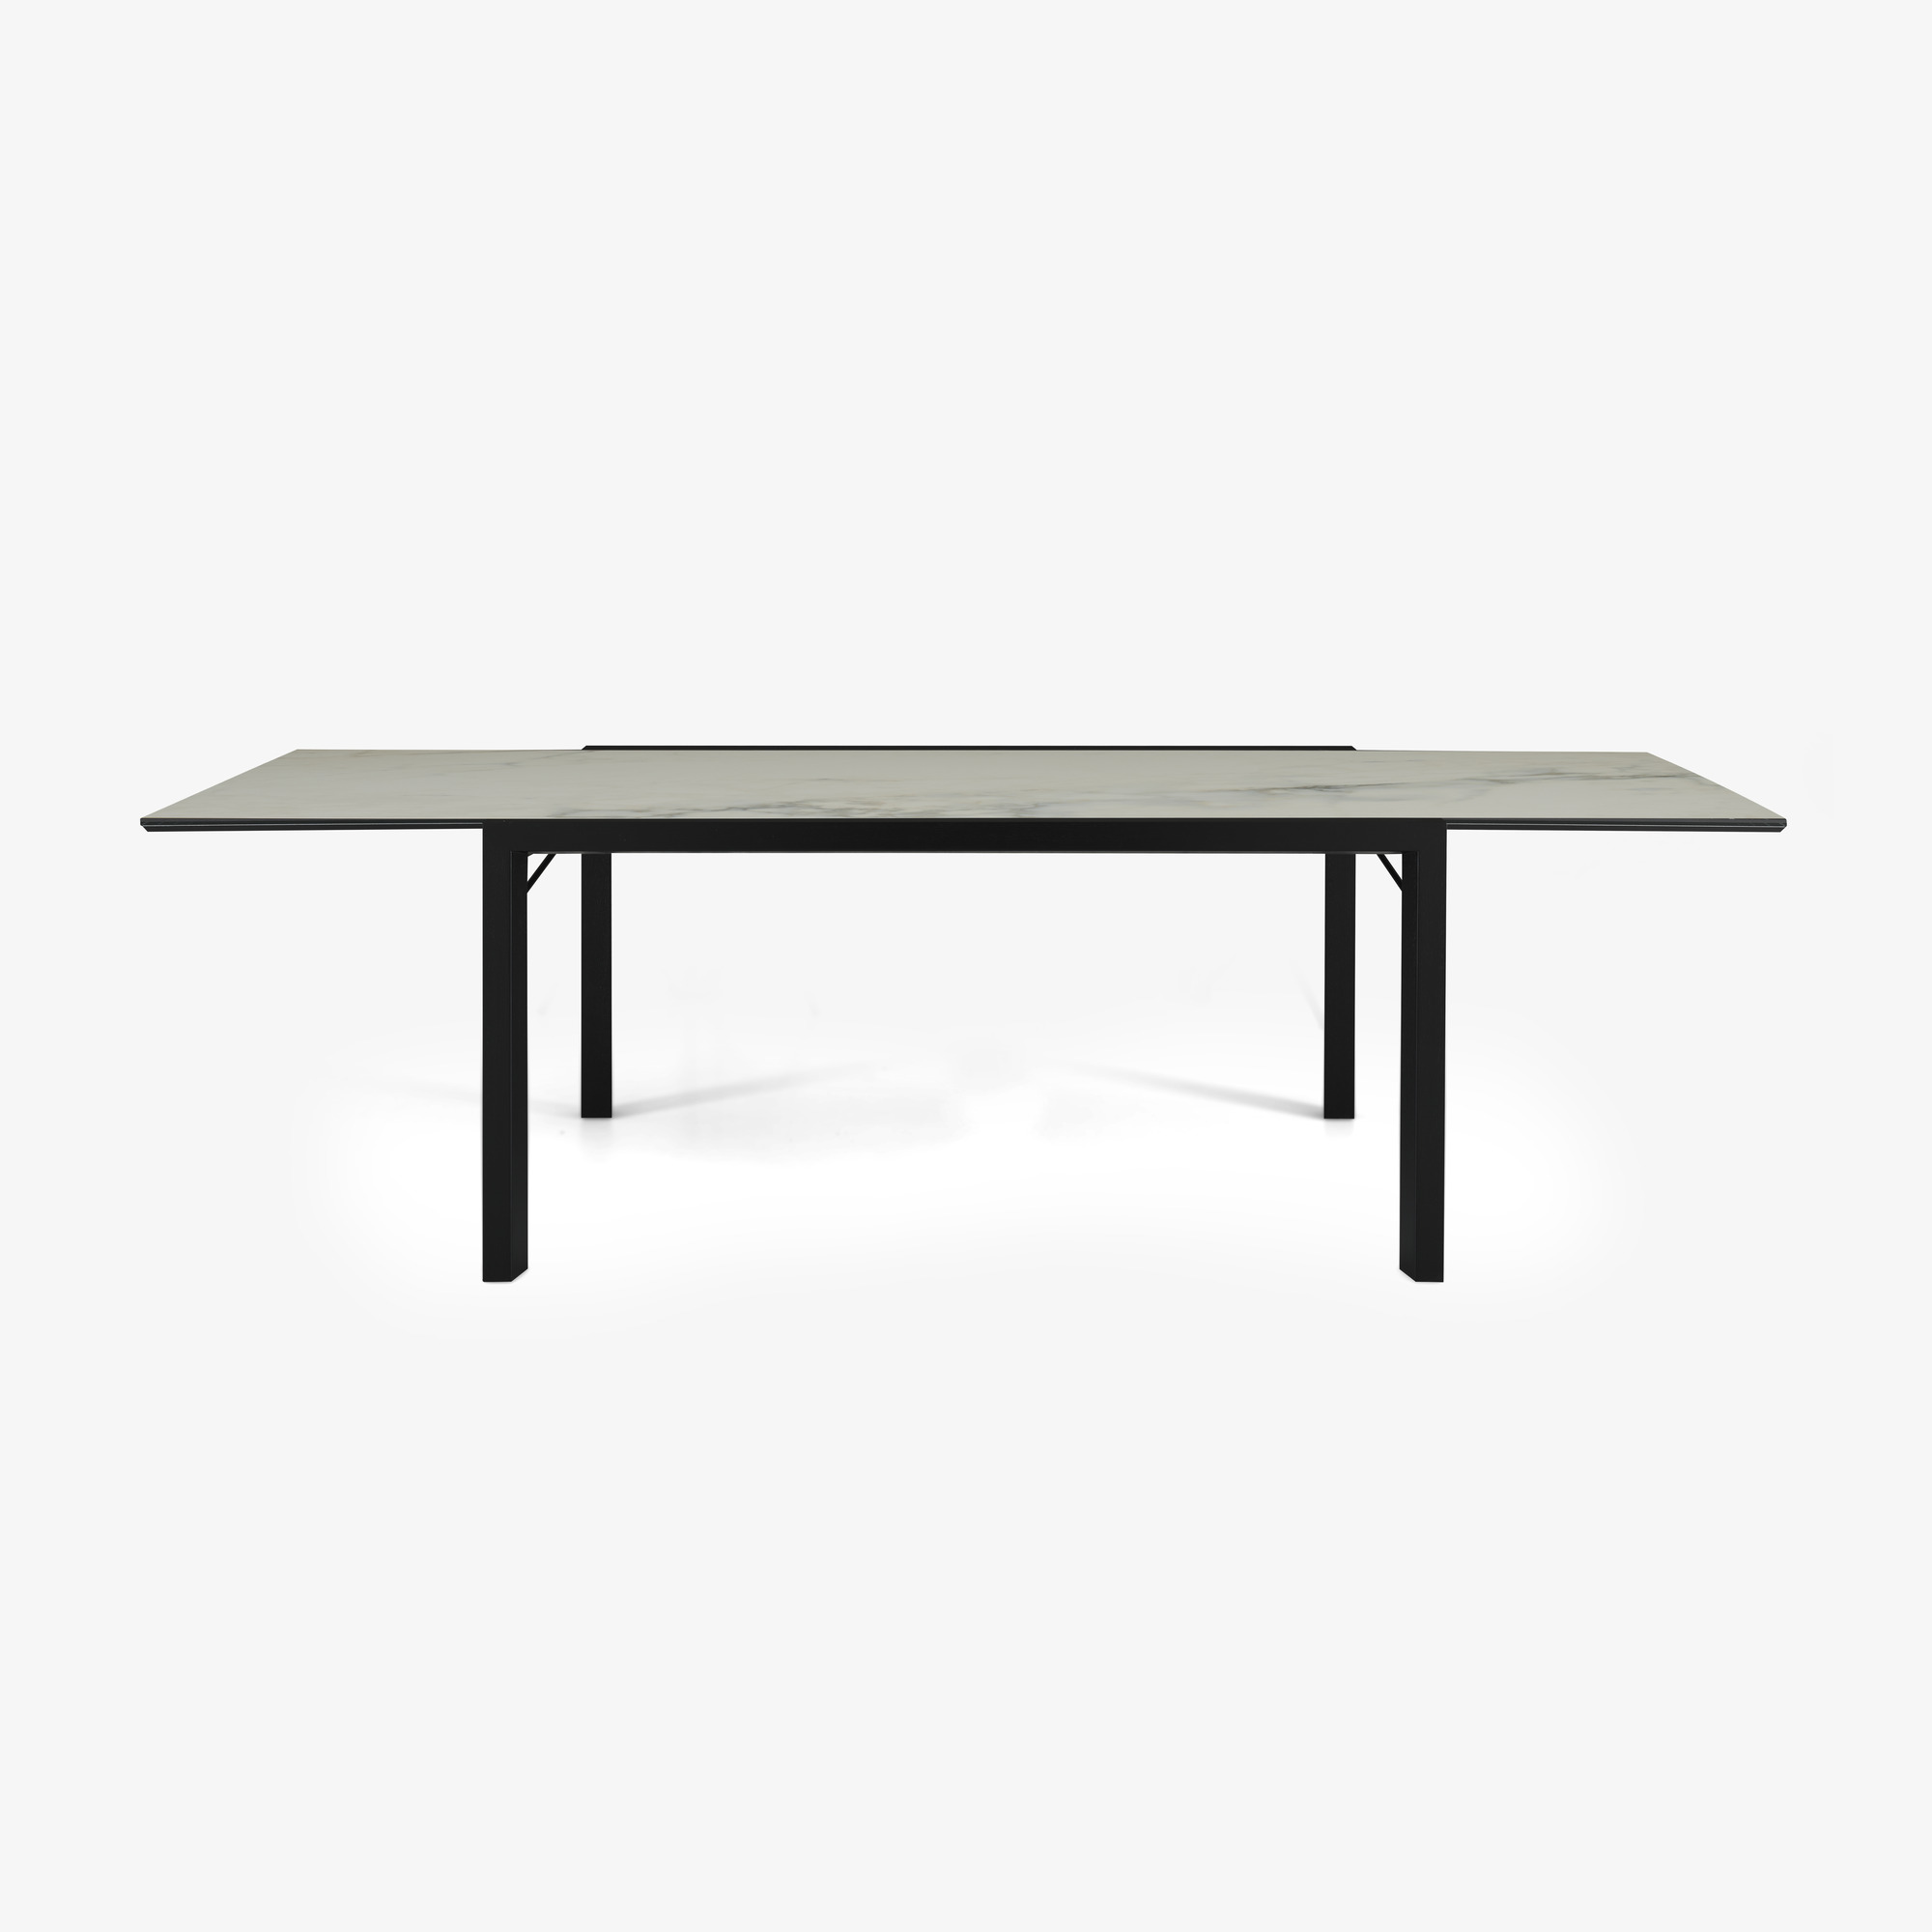 Image Dining table top in white marble-effect ceramic stoneware base in black stained ash 4